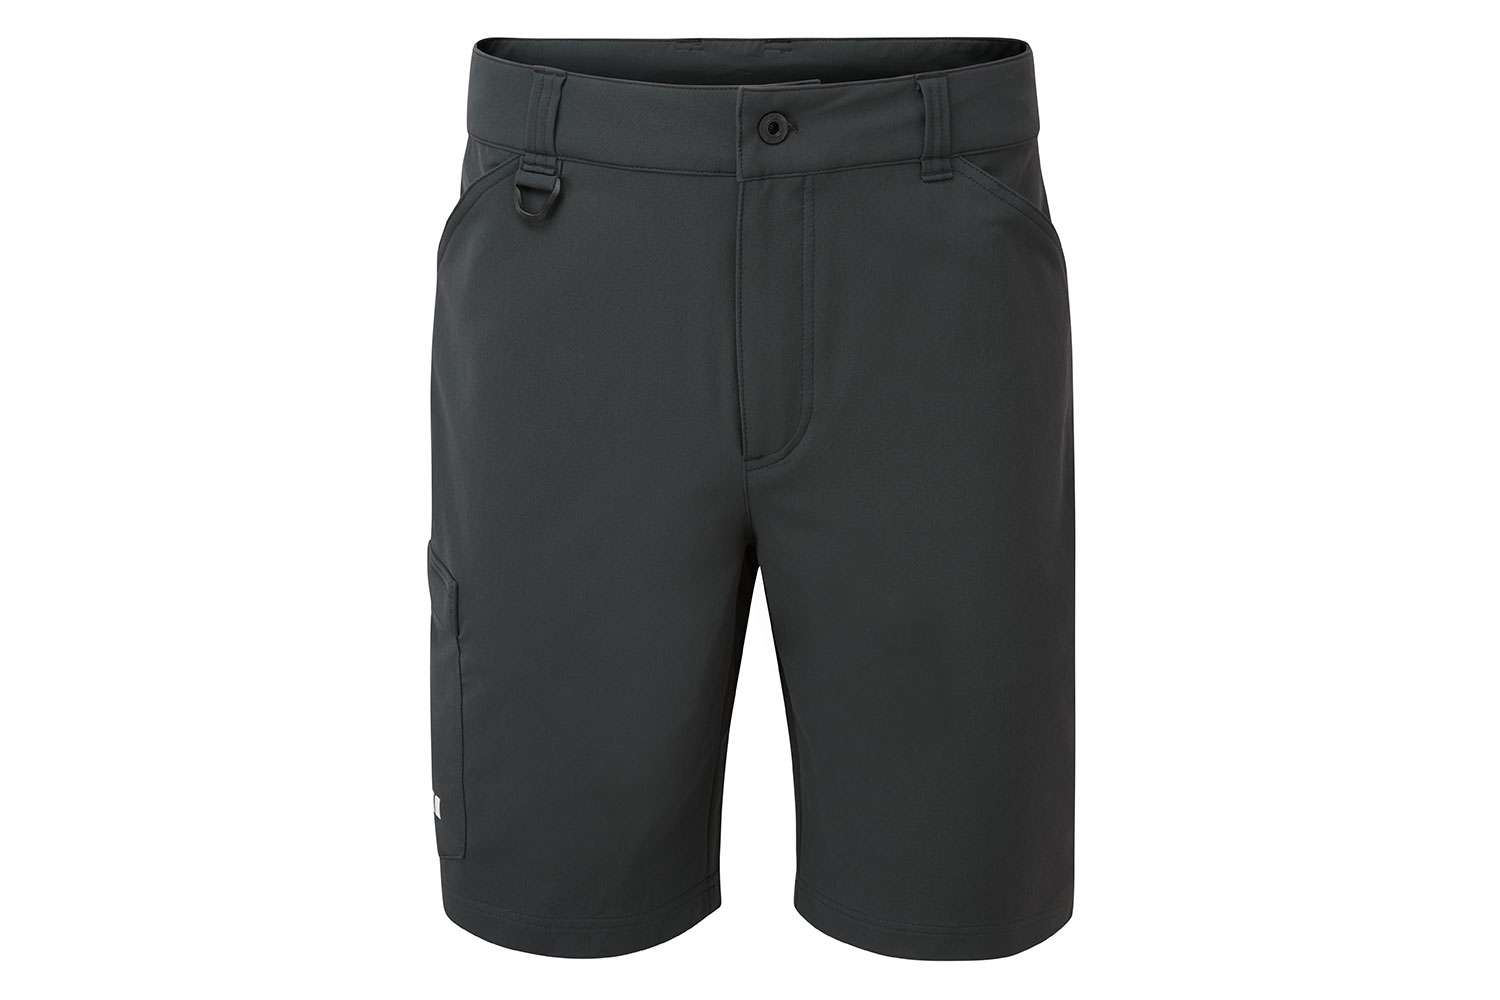     <B>Gill FG120 Expedition Shorts</B>
<BR>Expedition Shorts have been in the Gill line for a while â but not like this. Featuring a patented 4-way stretch fabric and UV50+ protection. This year the company added two great product advancements â zippered side pockets (upgraded from Velcro) and a reinforced pliers pocket so your tools are always close at hand. Like the rest of our fishing line, these shorts also feature a kill cord switch loop in addition to angled back pockets for ease of access. 
<BR>
<B>MSRP: $69.95</B>

<BR>
<a href=